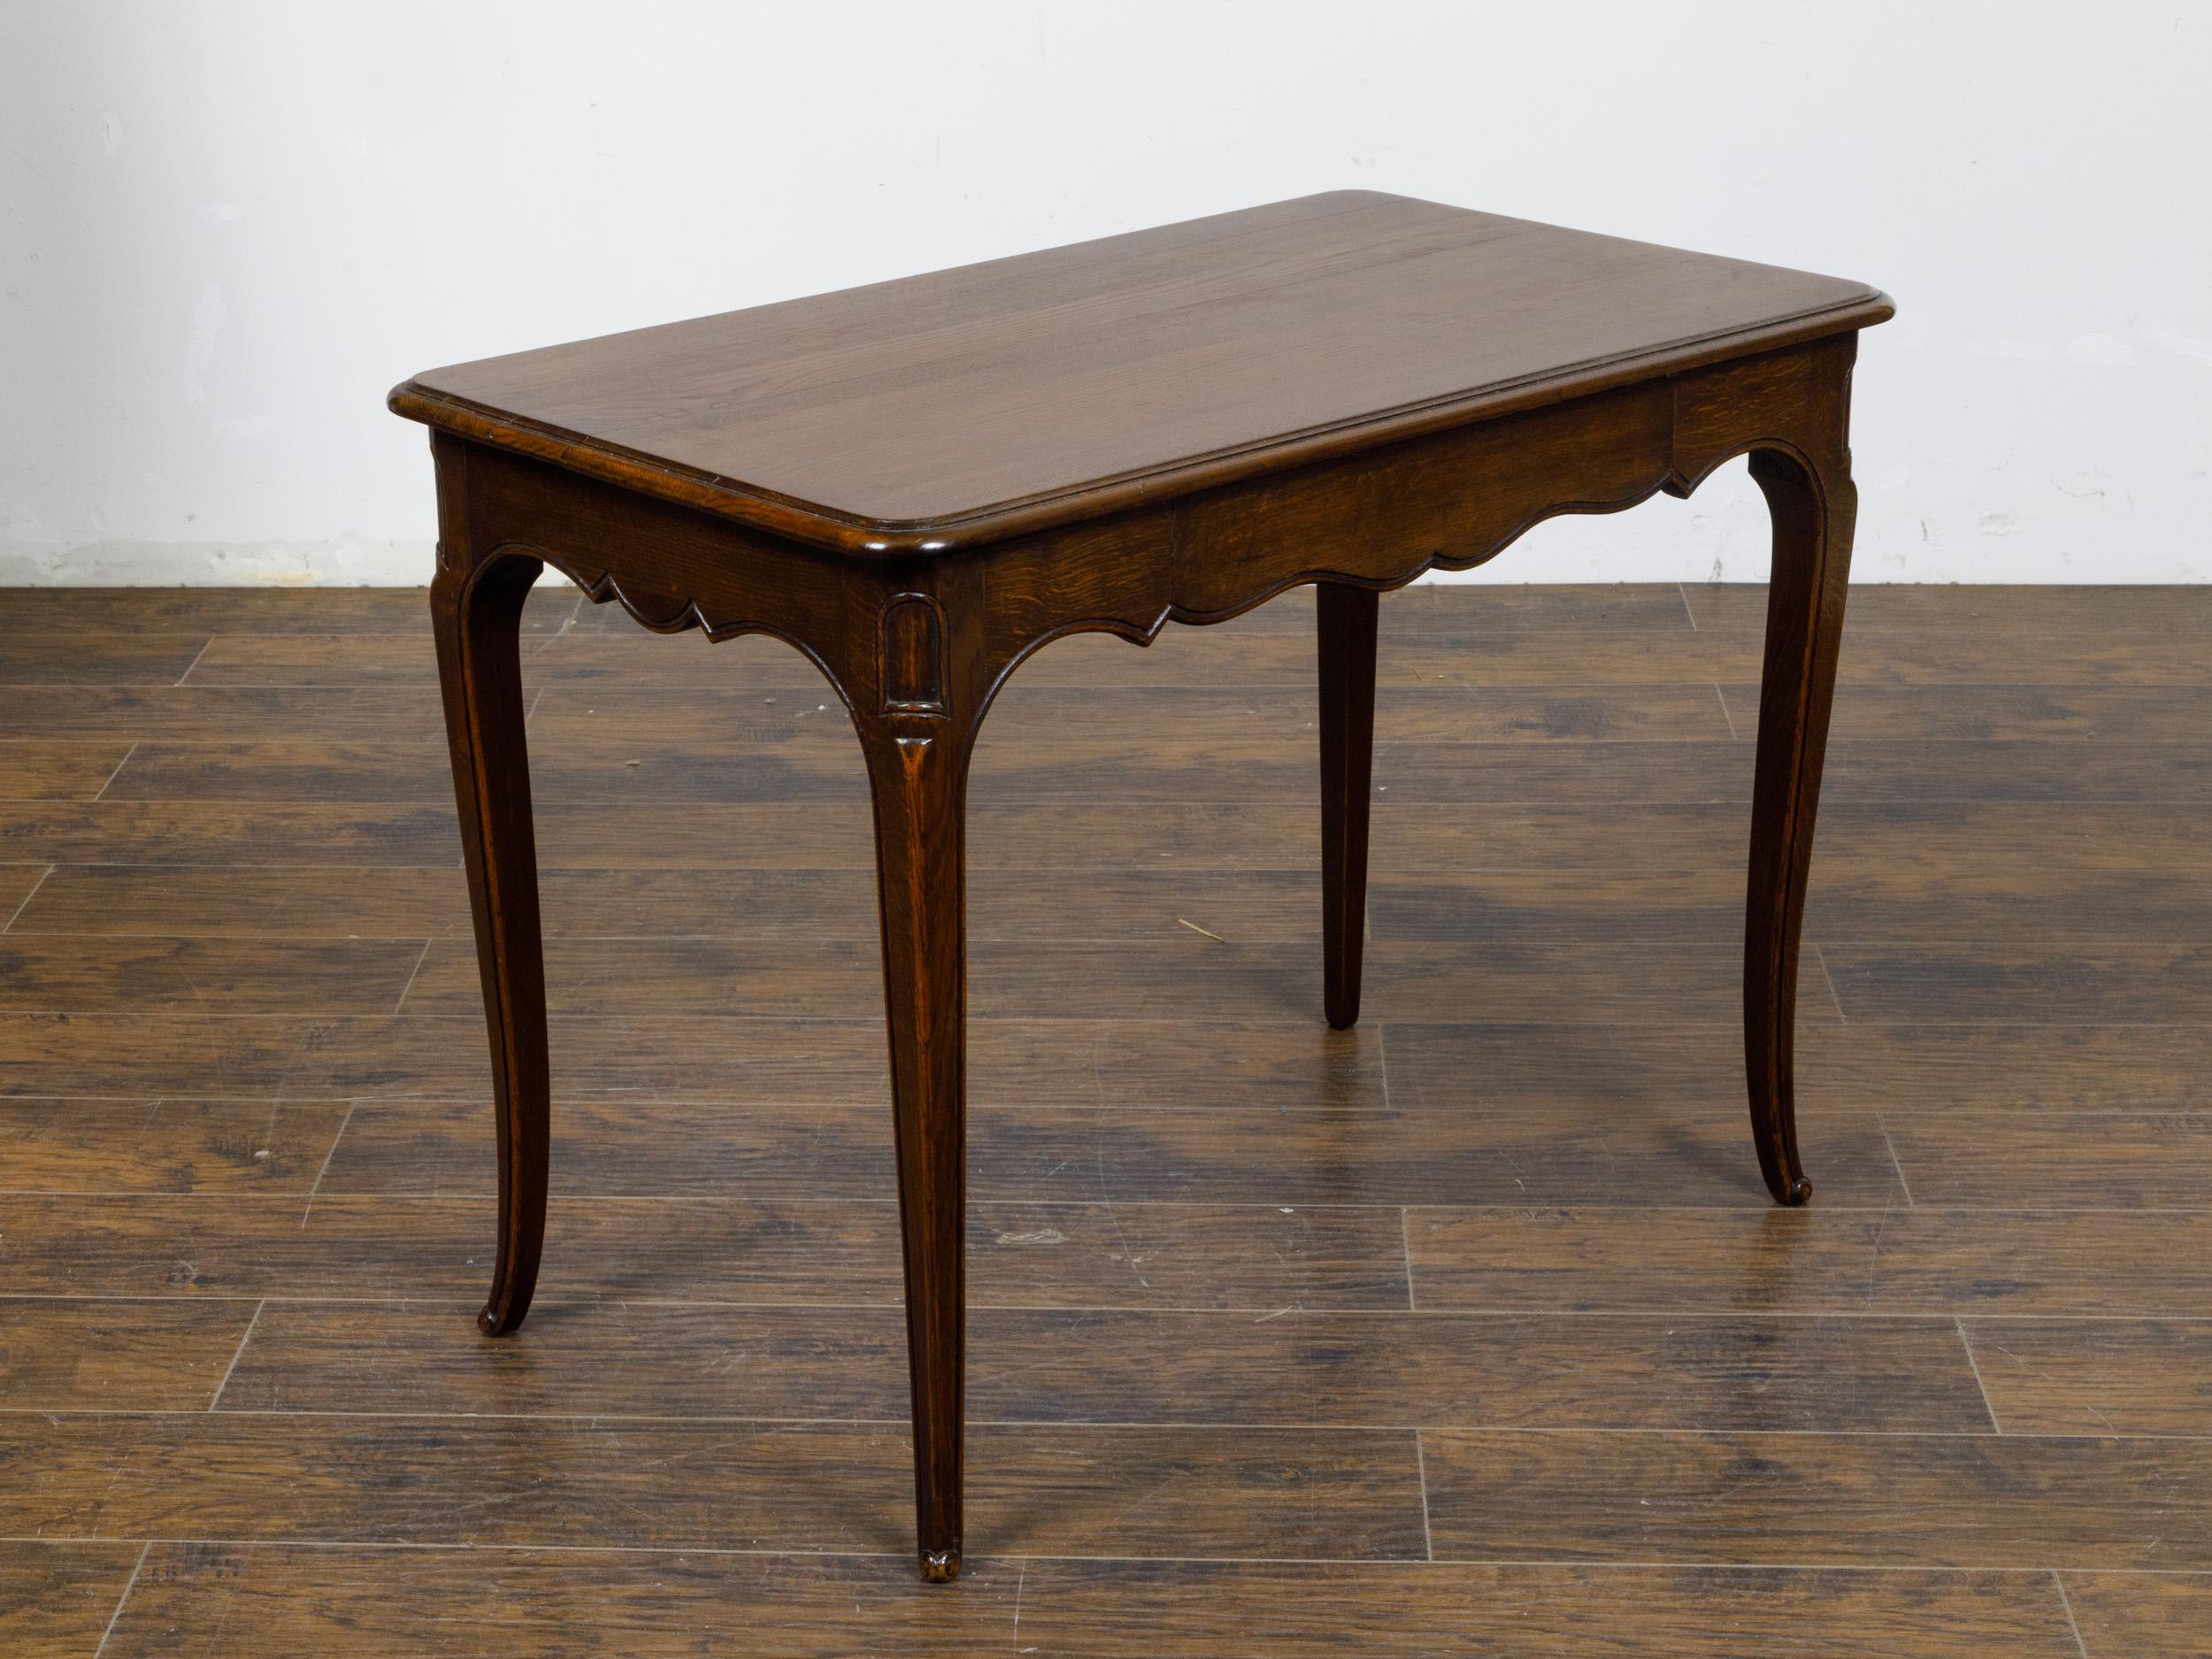 A French Louis XV style oak side table from circa 1900 with single drawer, scalloped apron, curving legs and scrolling feet. This exquisite French Louis XV style oak side table, circa 1900, perfectly embodies the elegance and grace of early